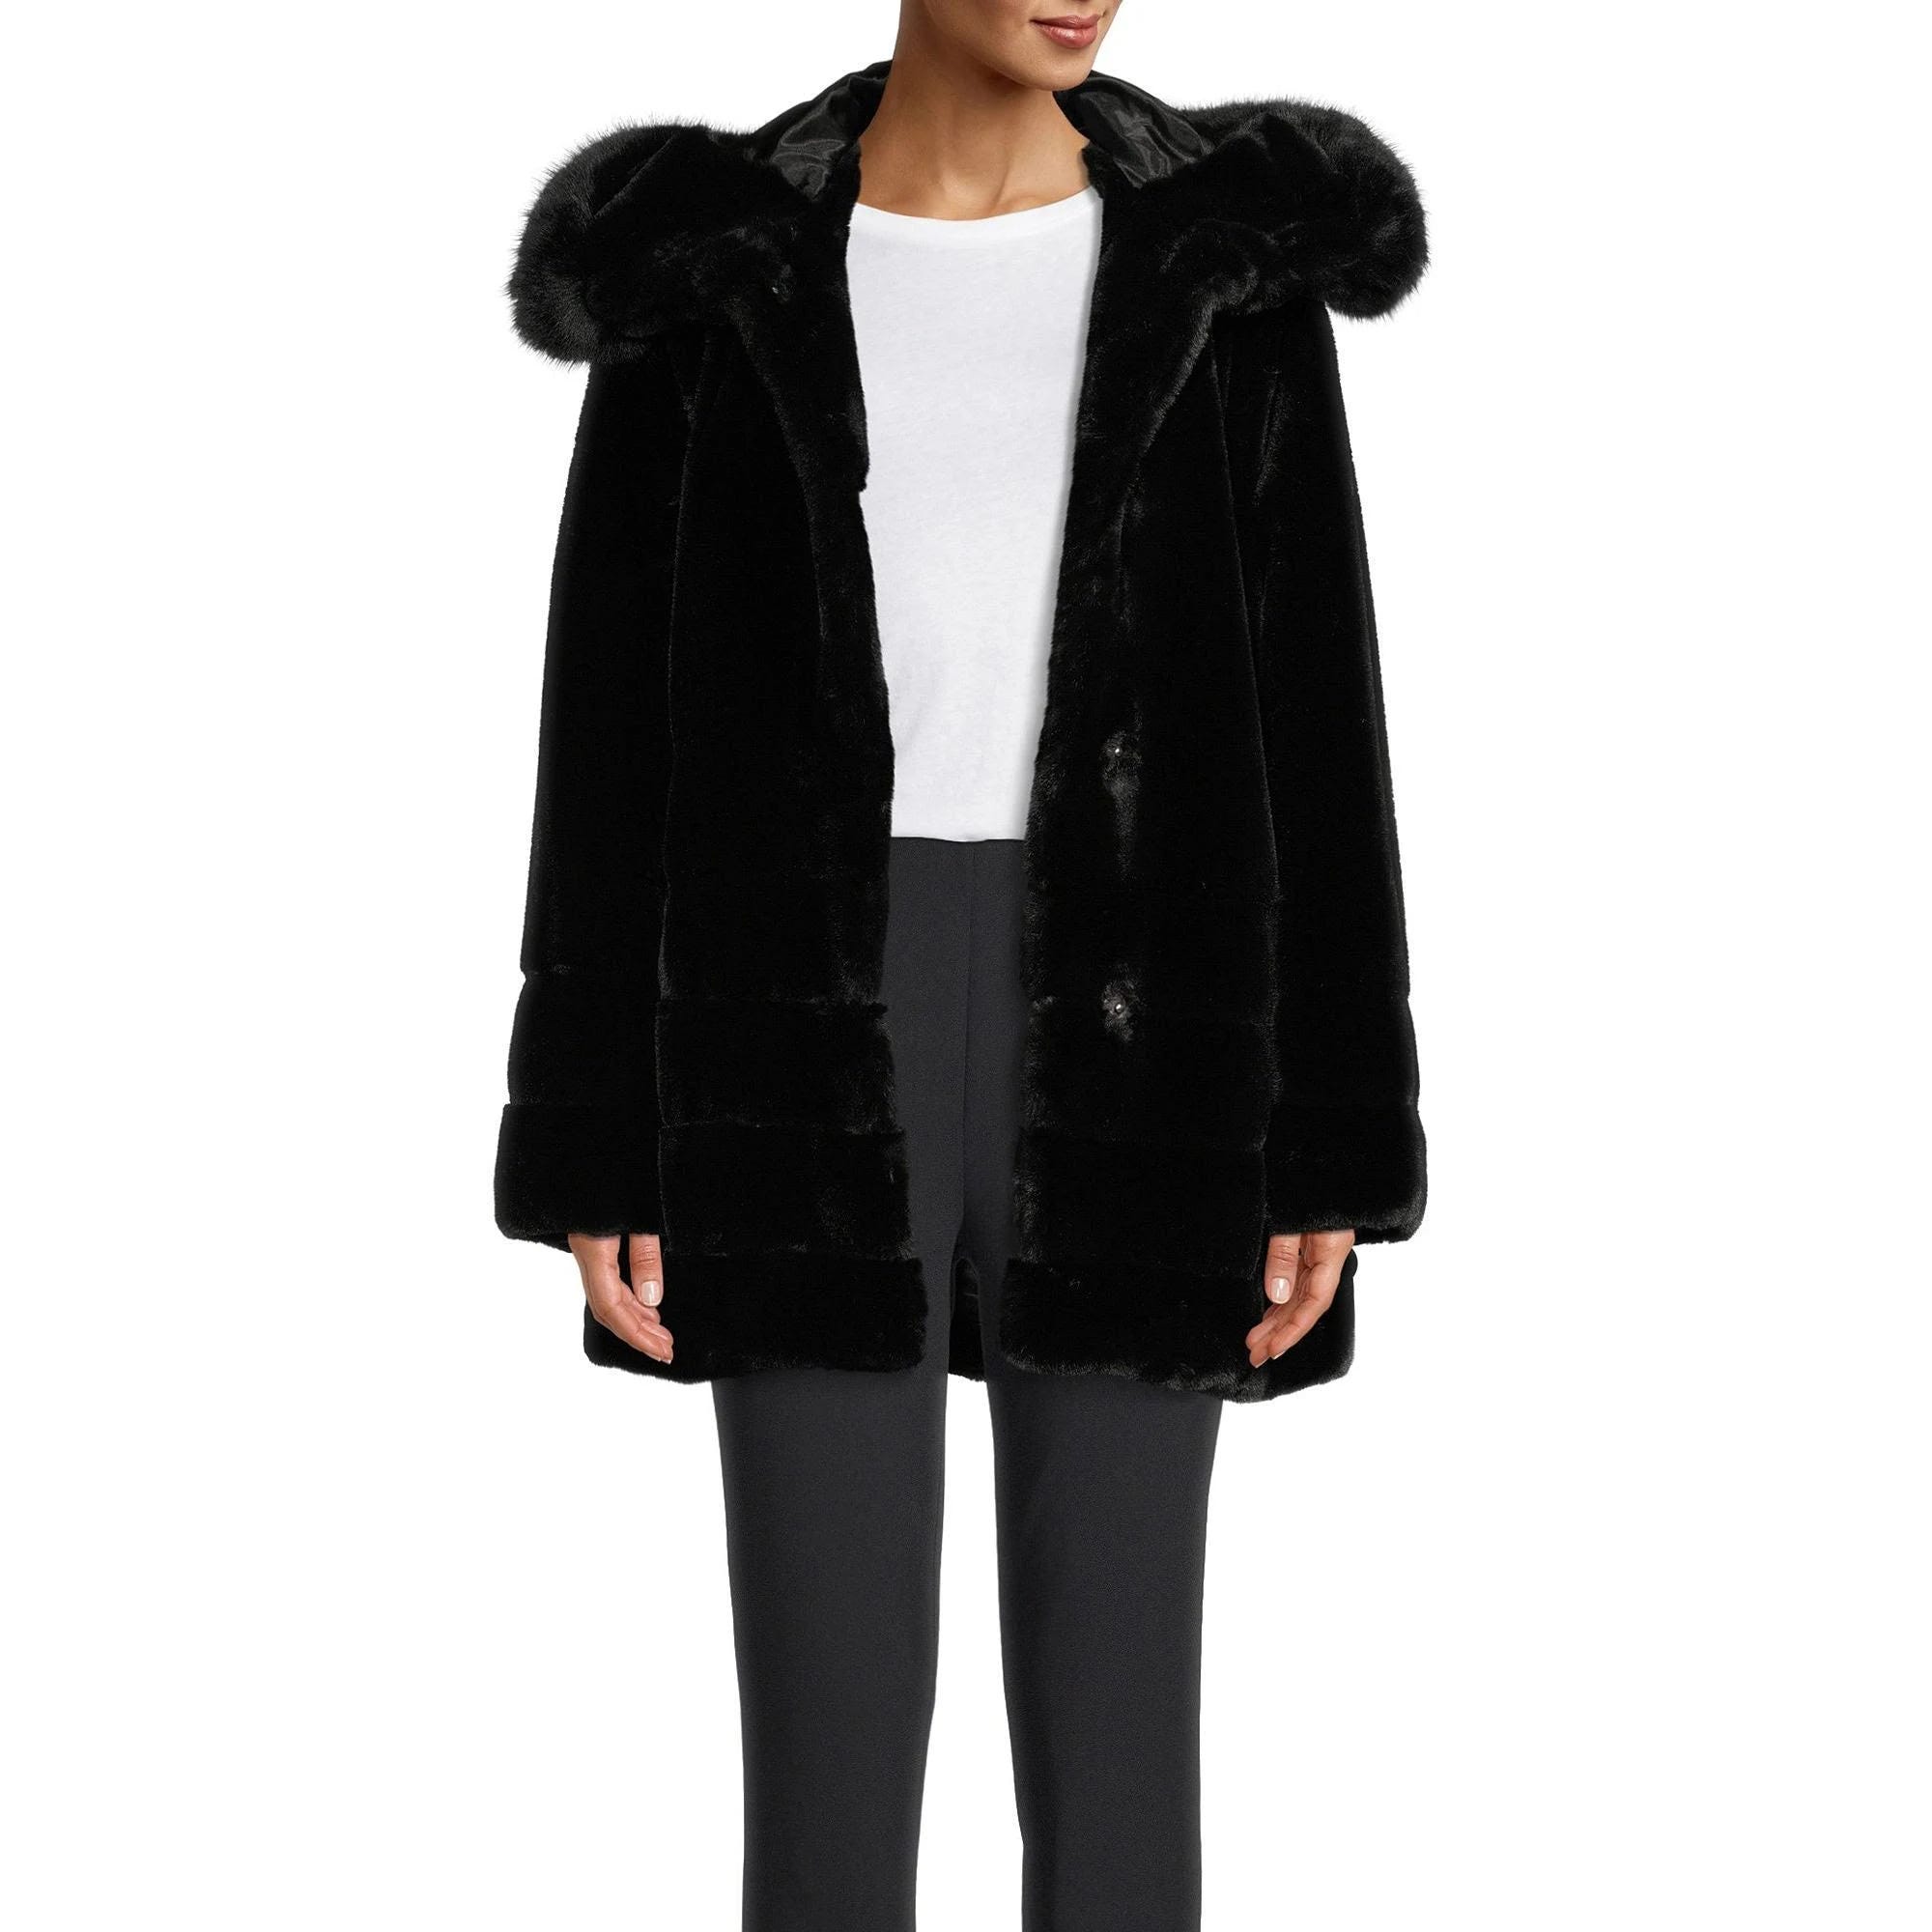 Luxurious Hooded Faux Fur Coat in Black XX-Large | Image